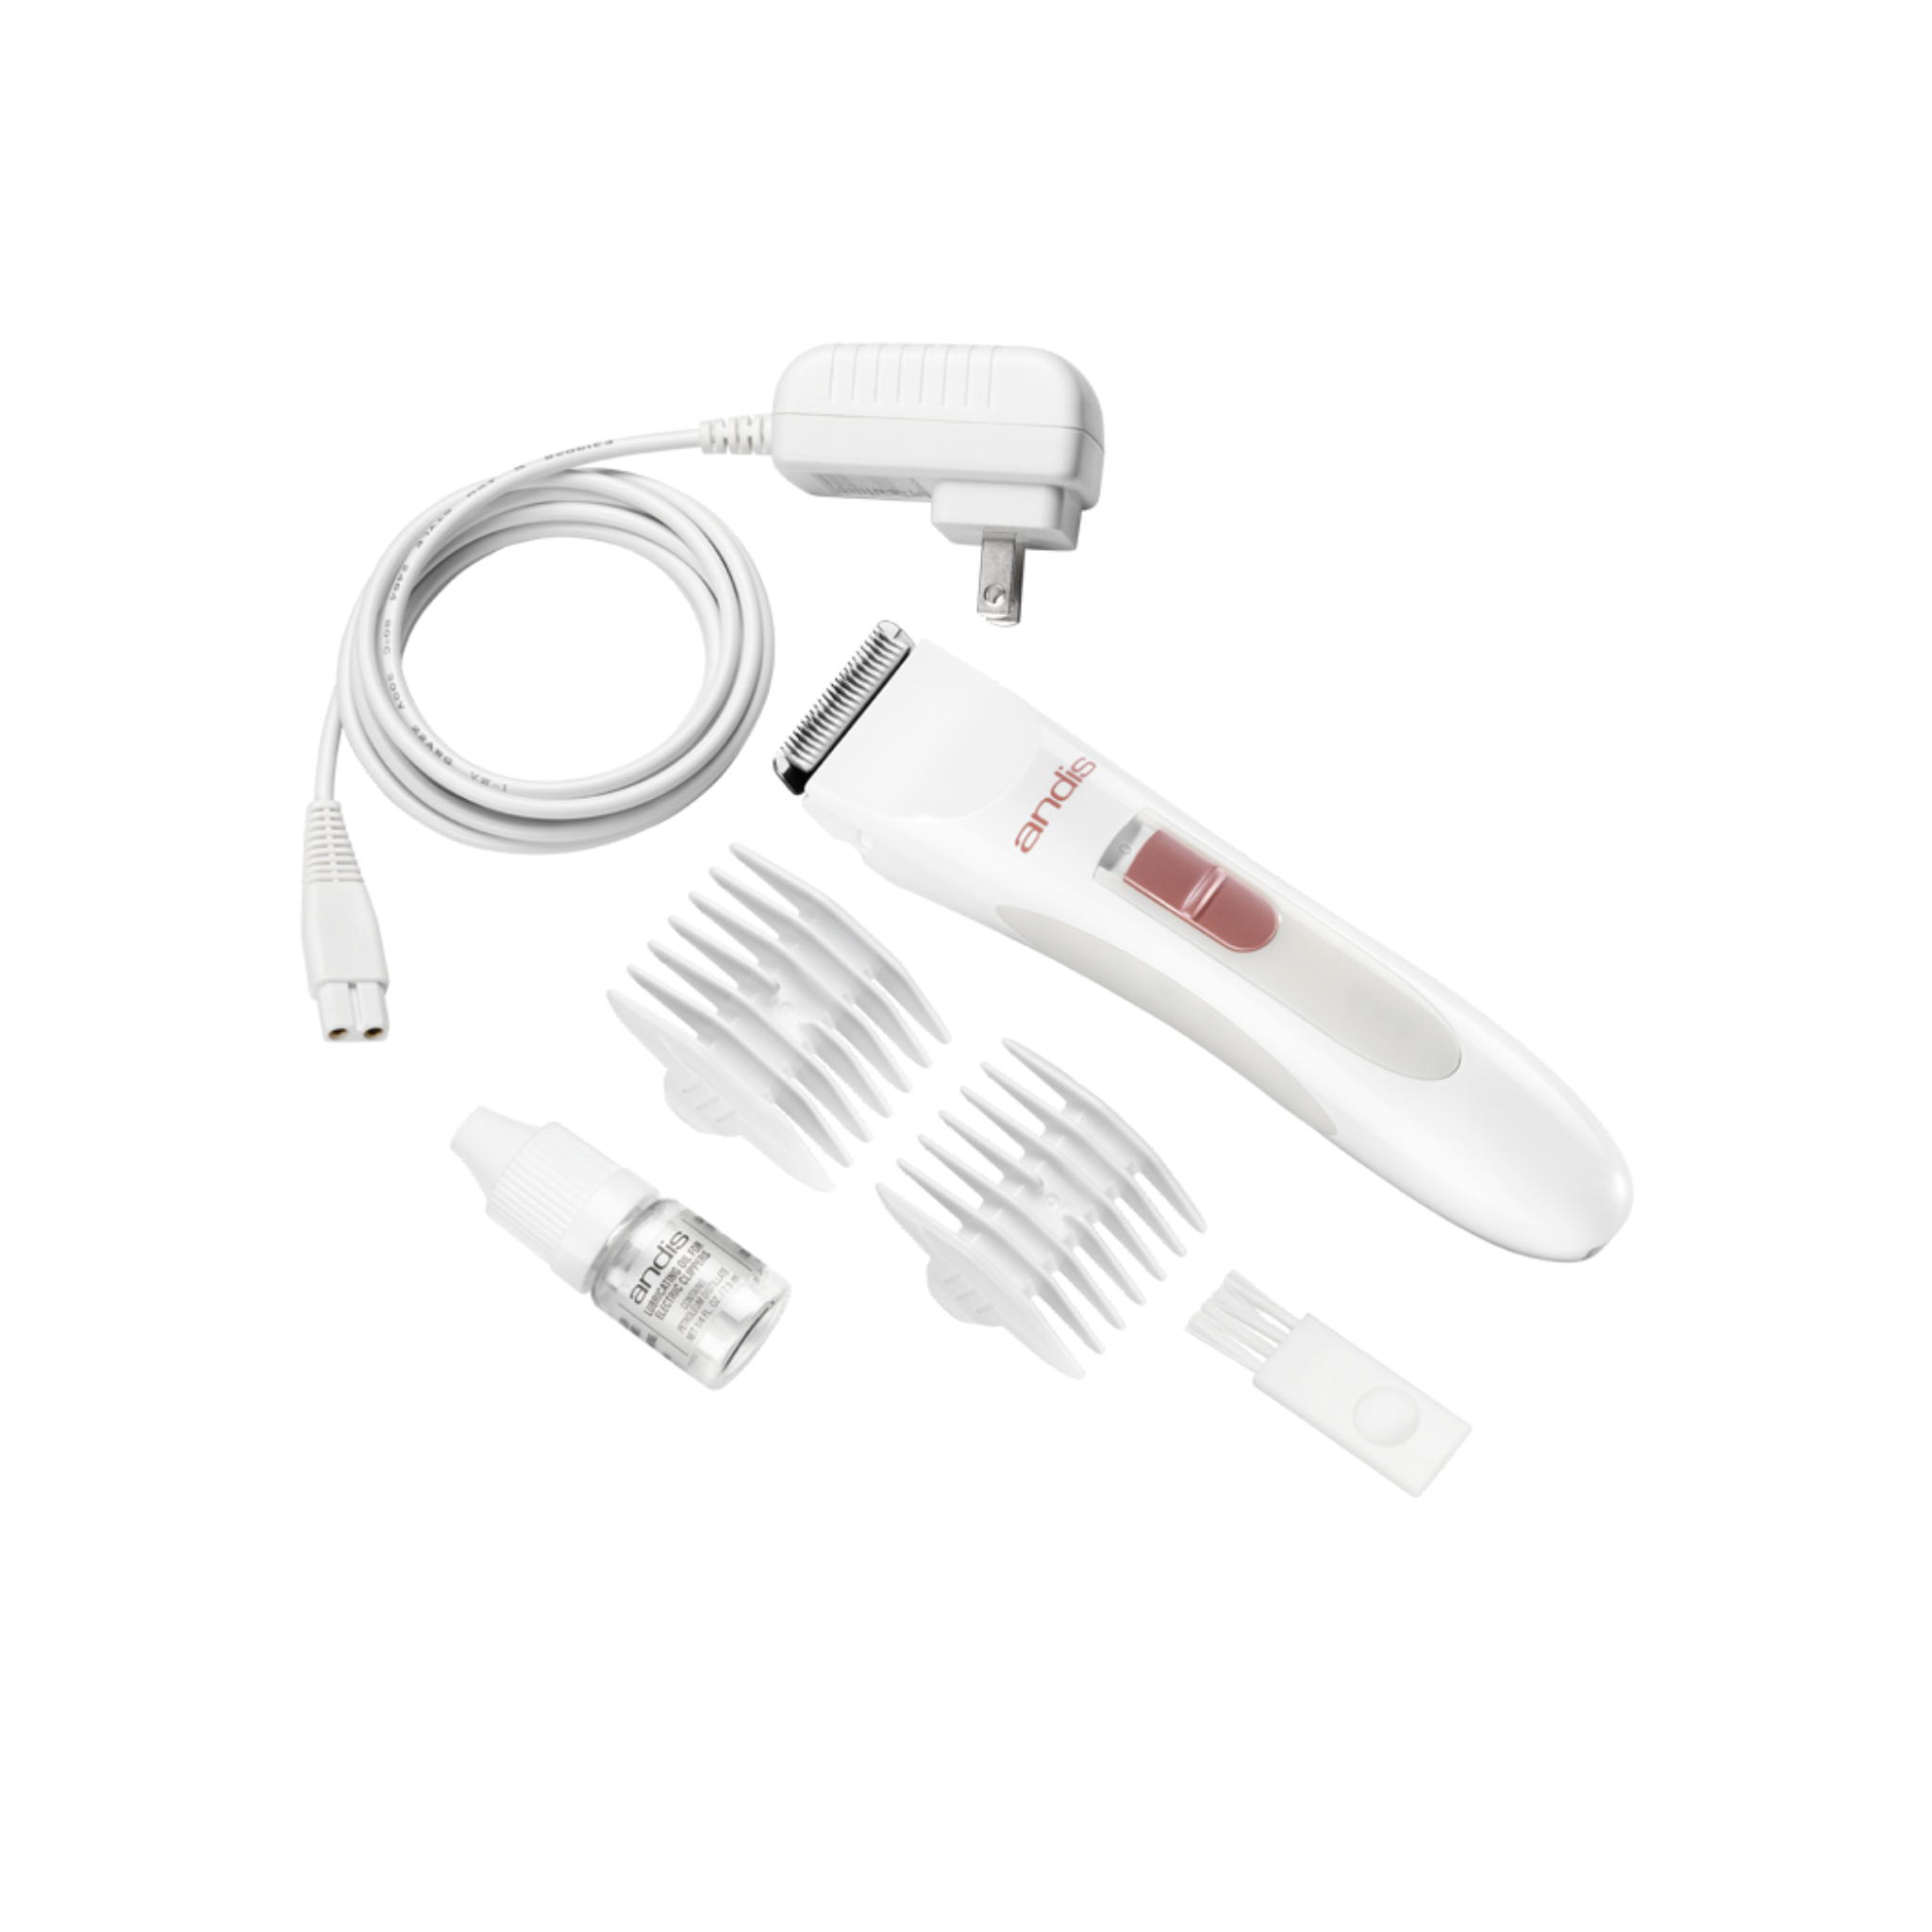 Personal Trimmer (Women's 6-Piece Kit)